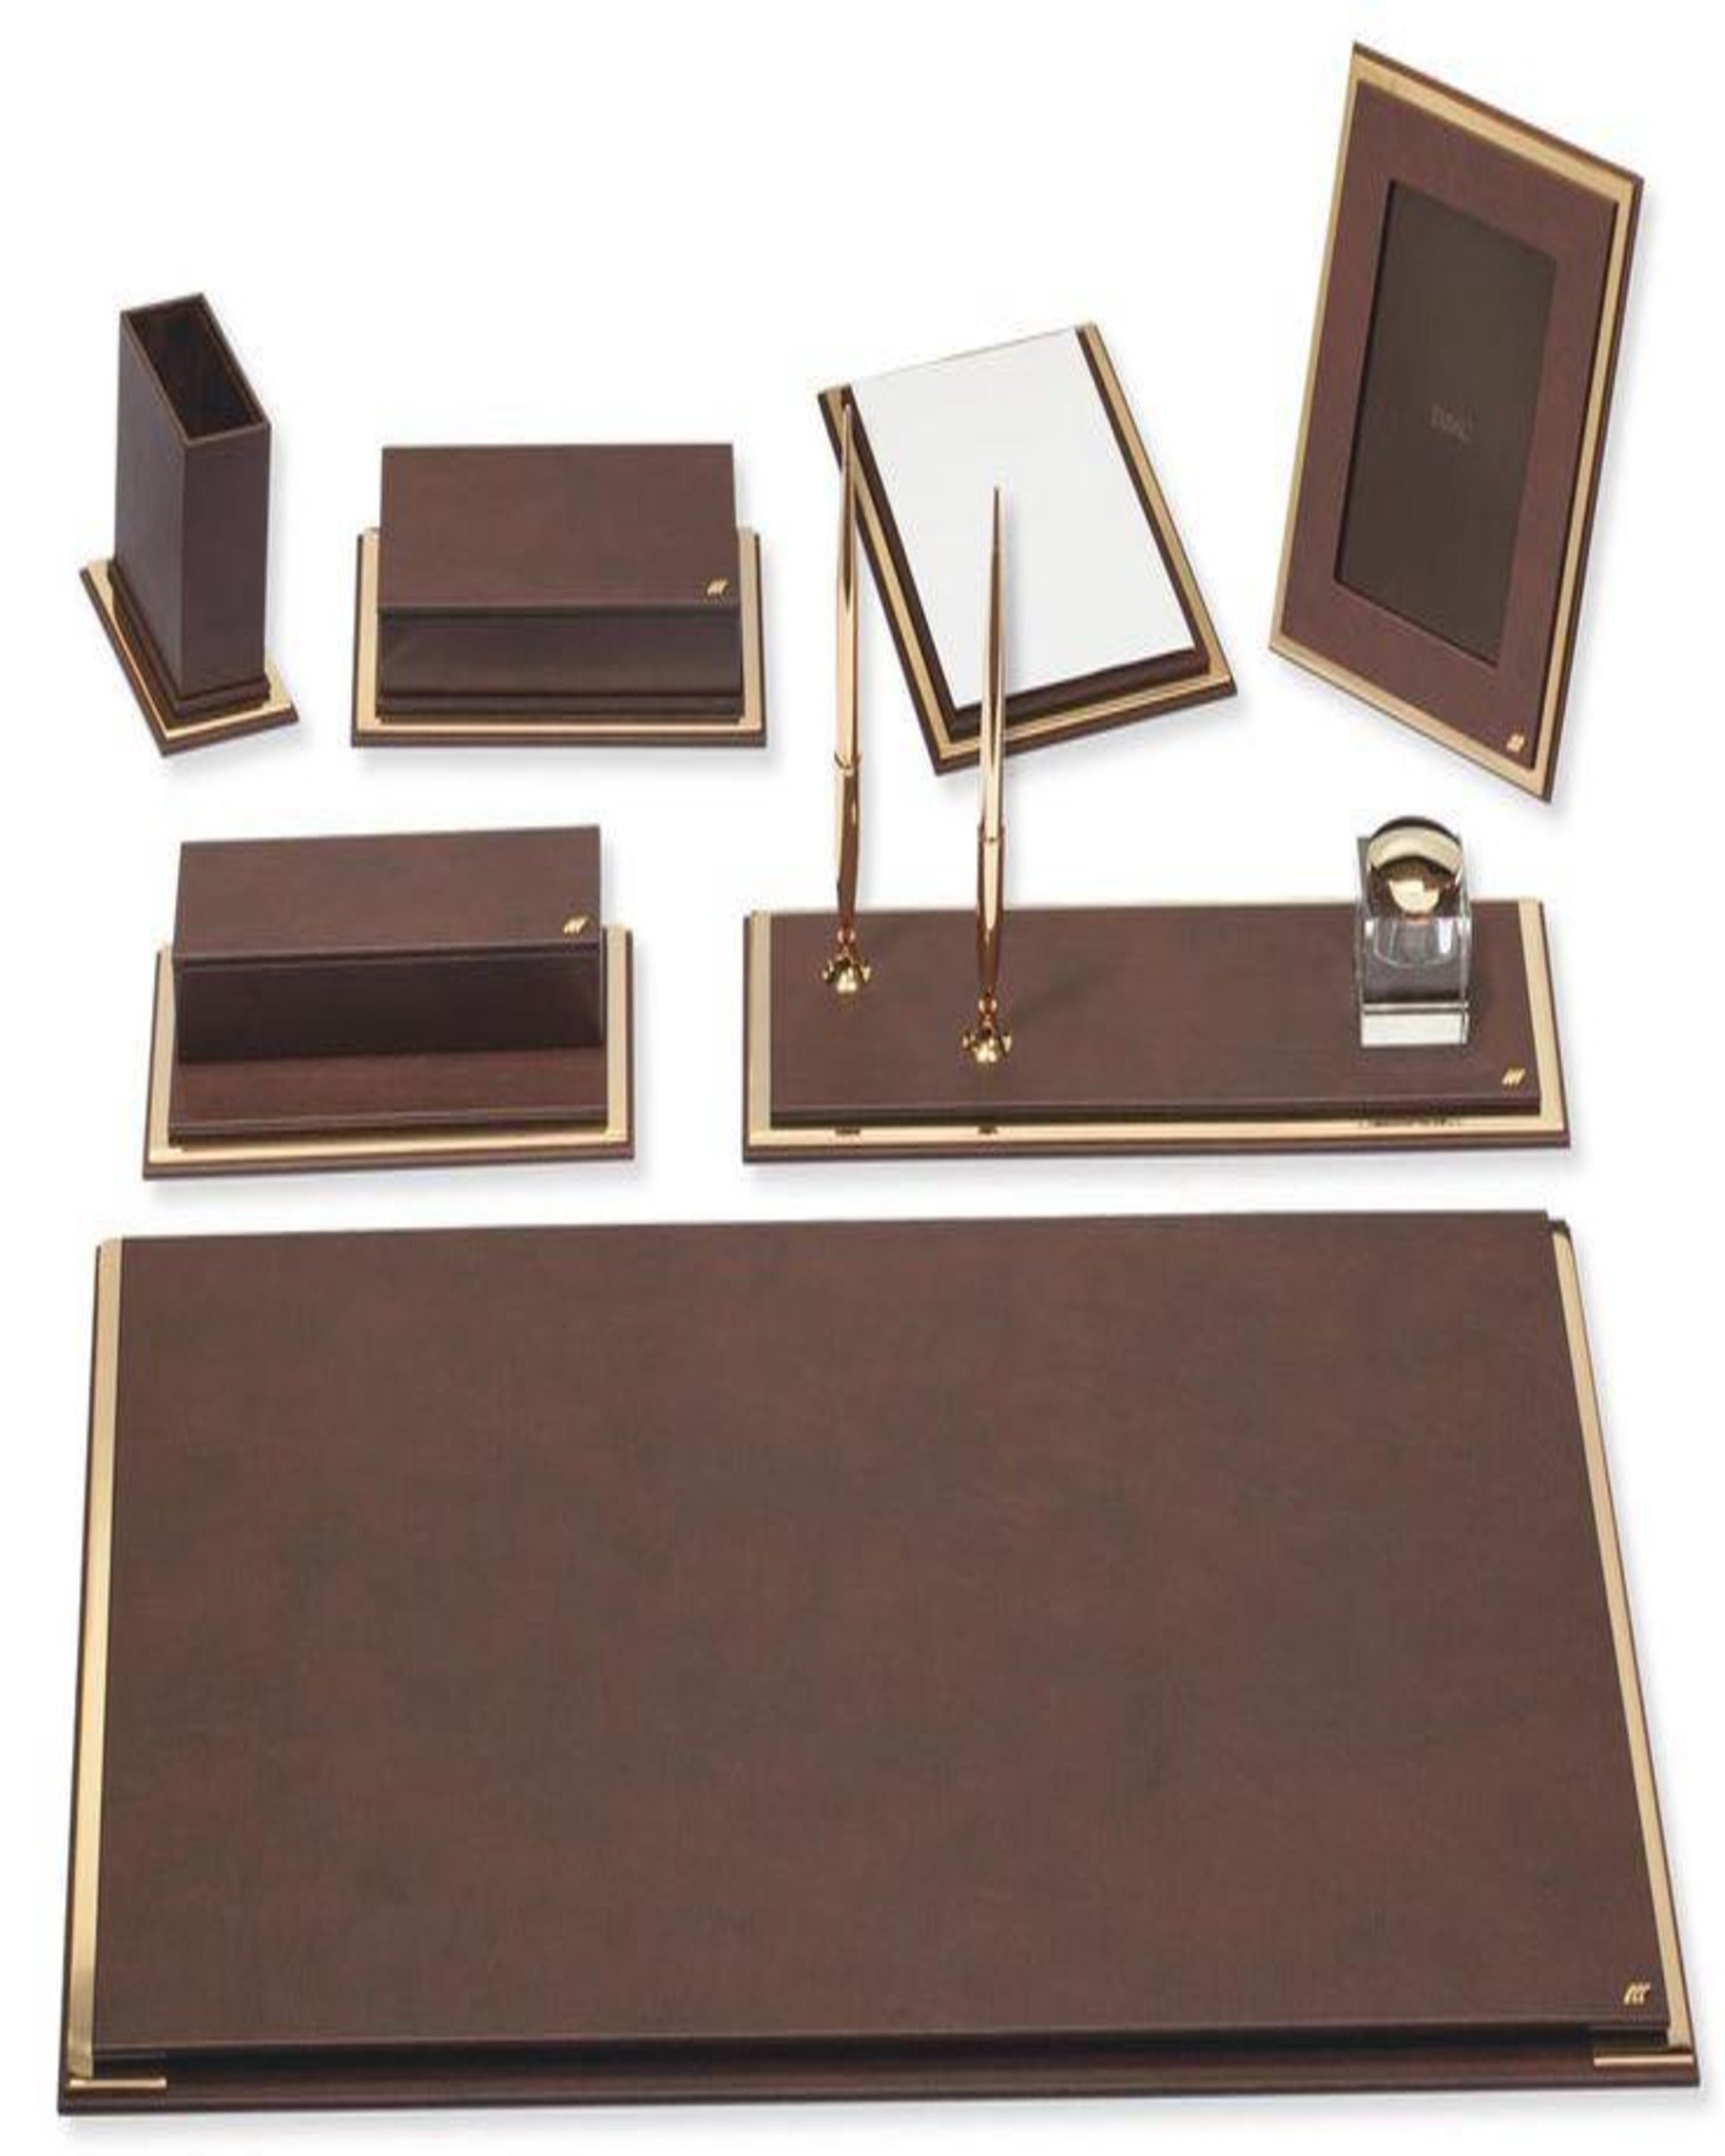 Tannery Stylish Leather Office Desk Set ANGIE HOMES